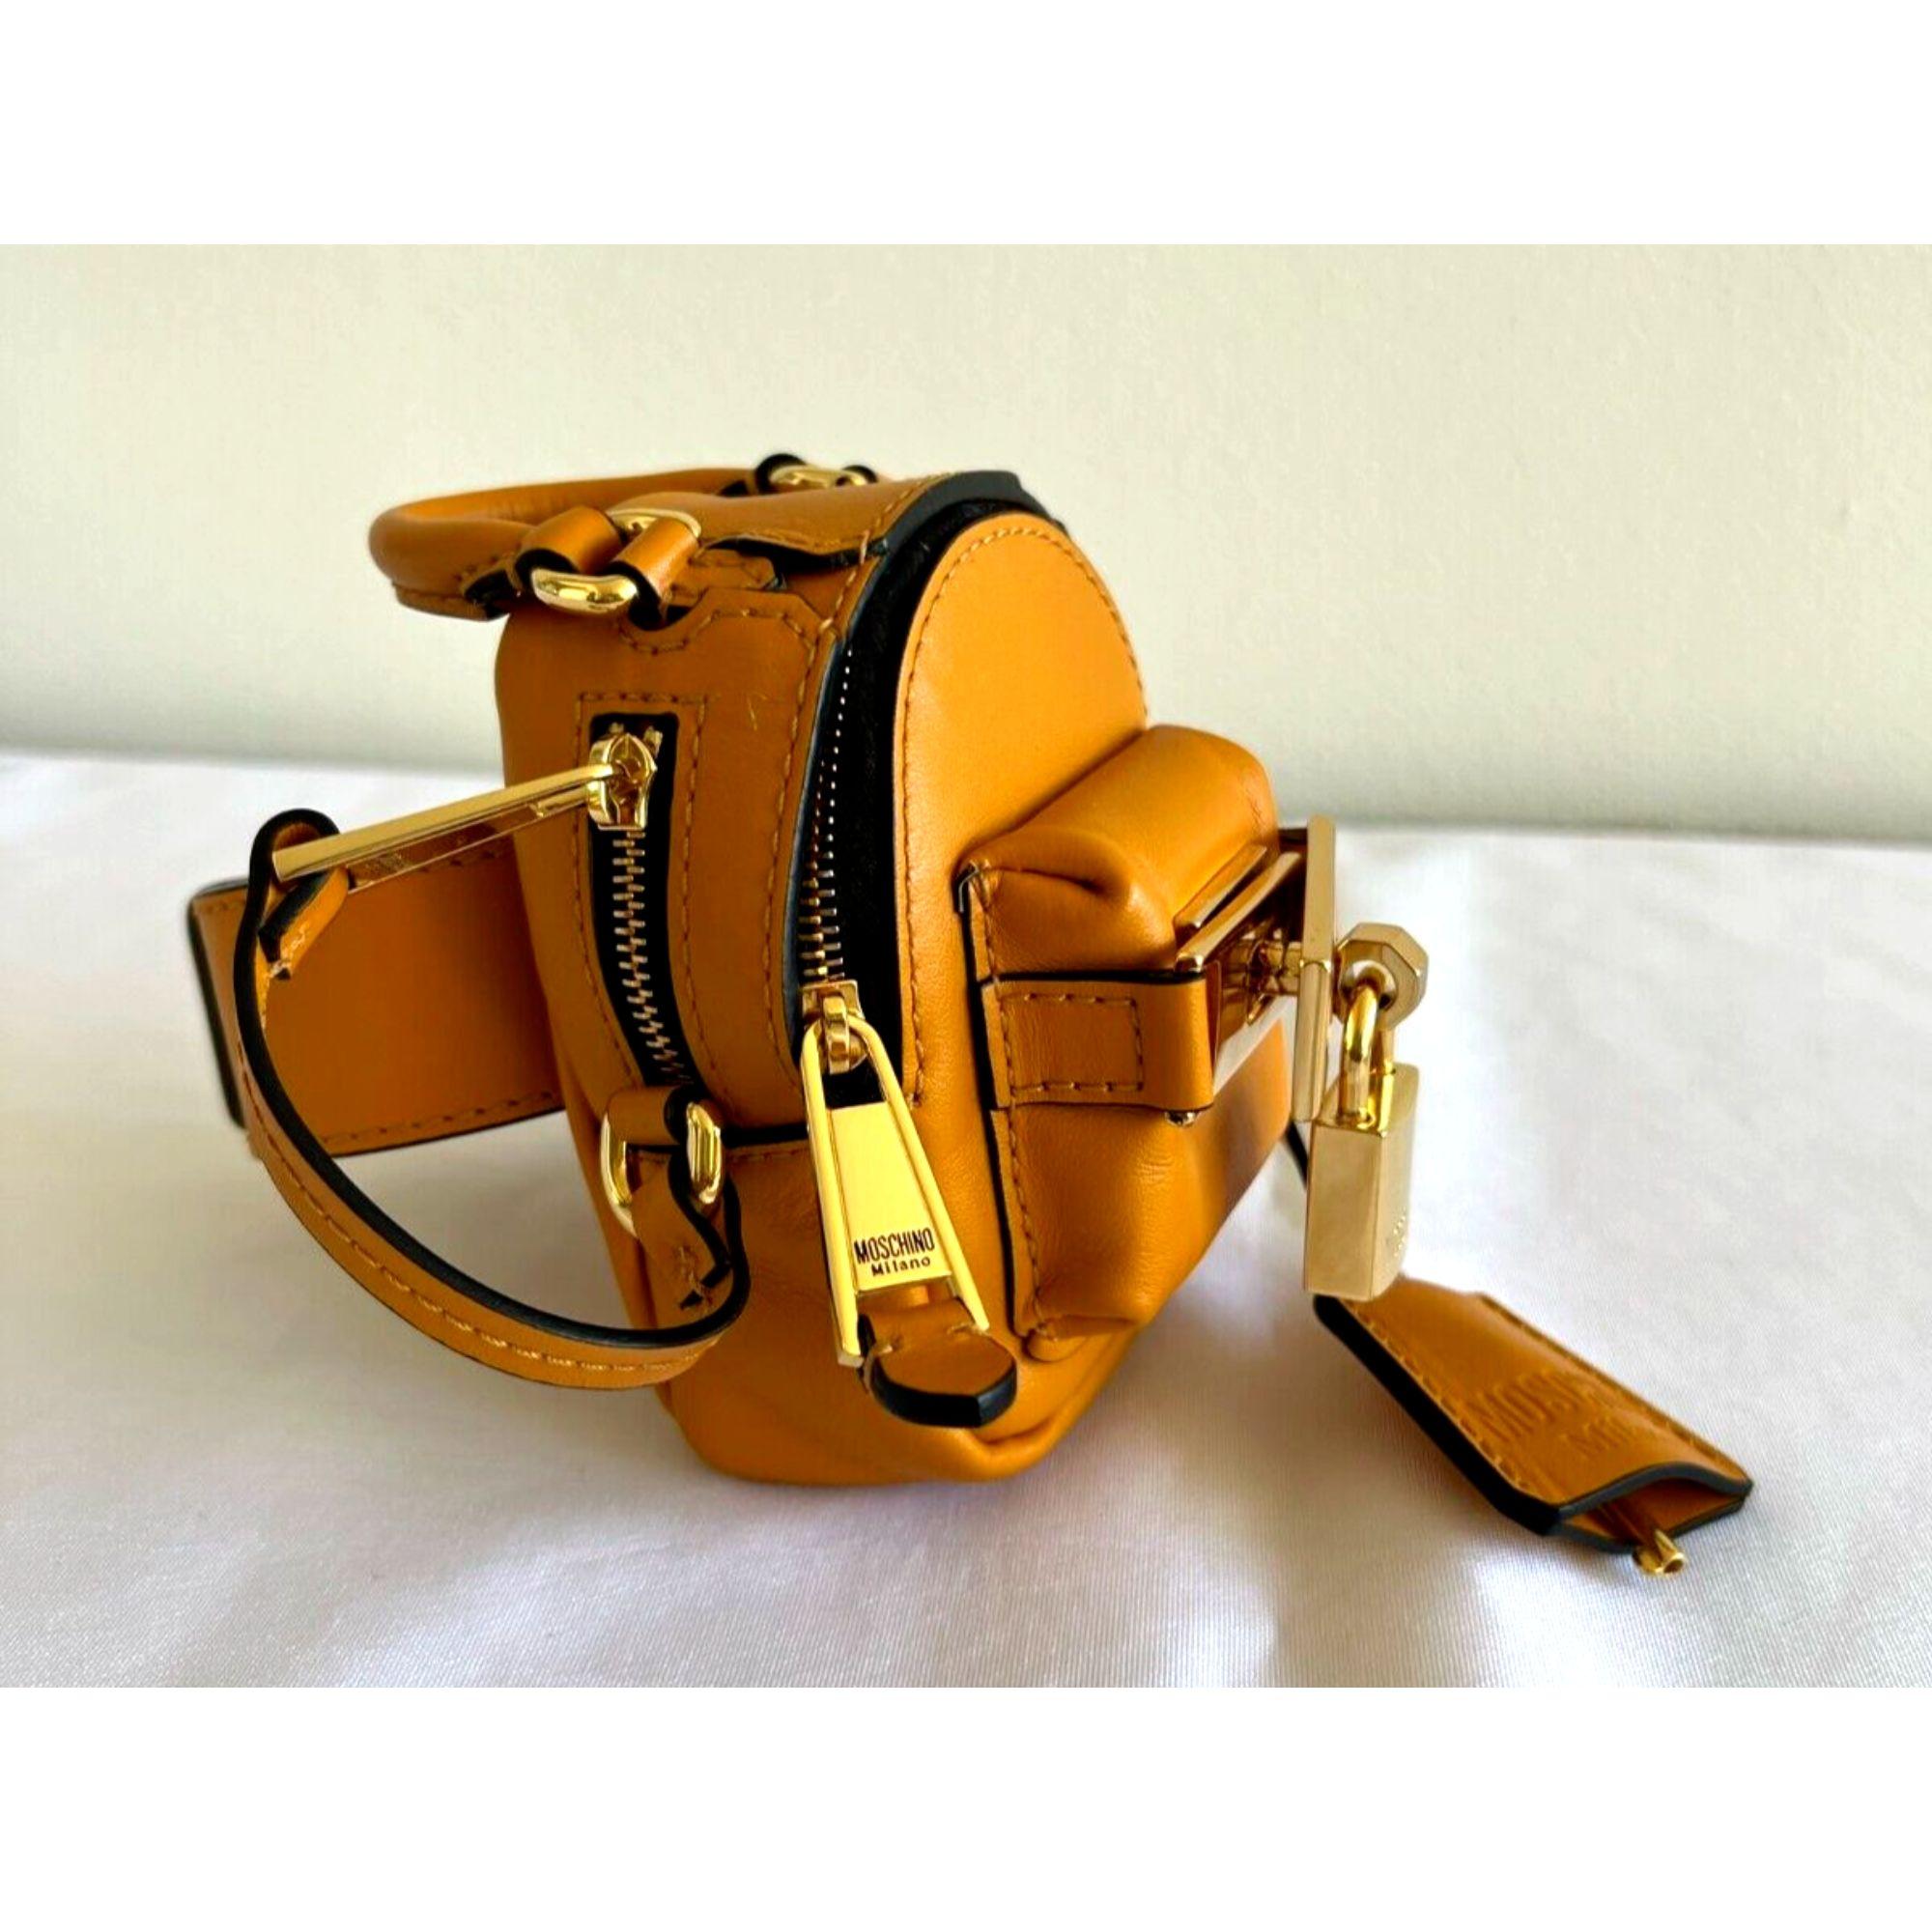 AW20 Moschino Couture Mustard Backpack Shaped Shoulder Bag by Jeremy Scott In New Condition For Sale In Matthews, NC